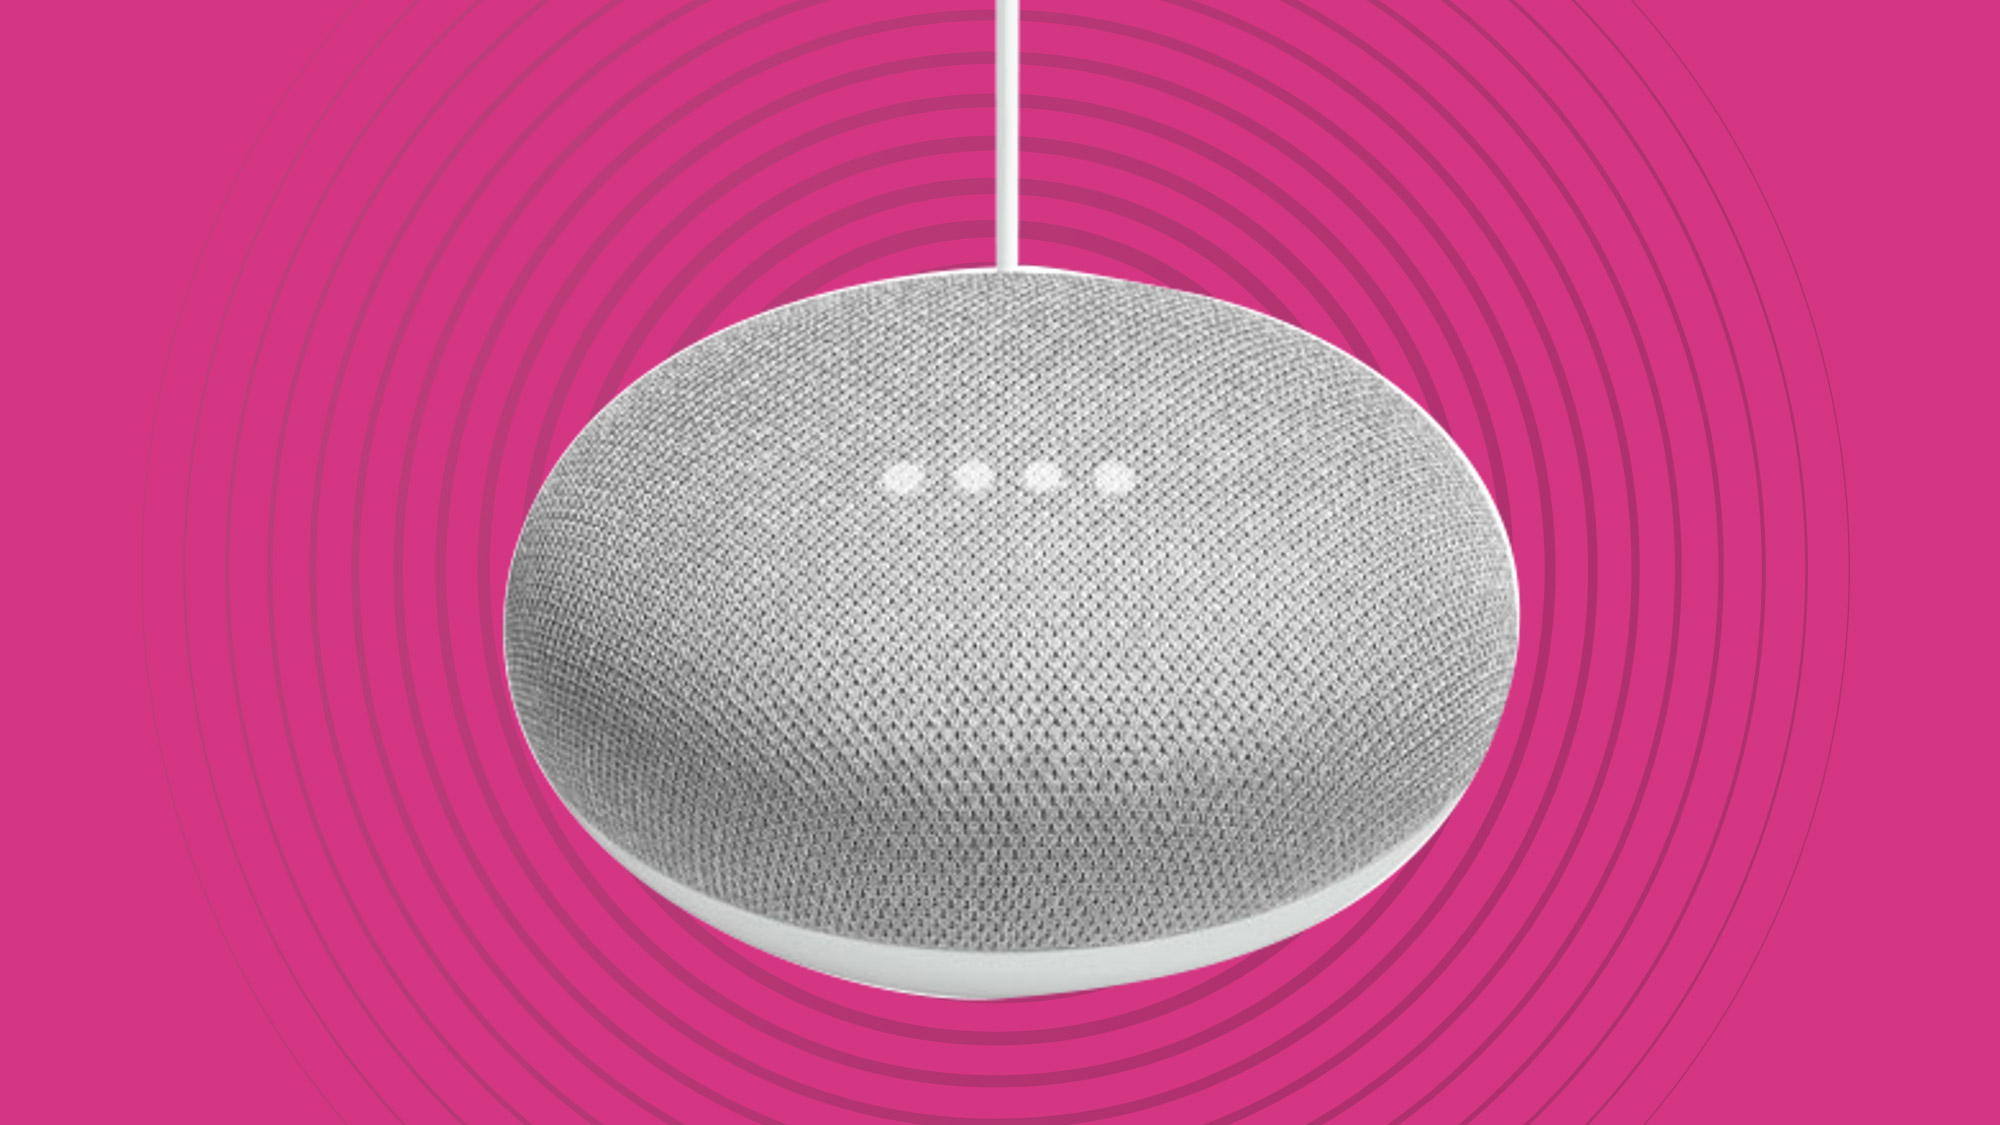 Ultimate Guide to Google Assistant and Google Nest Products